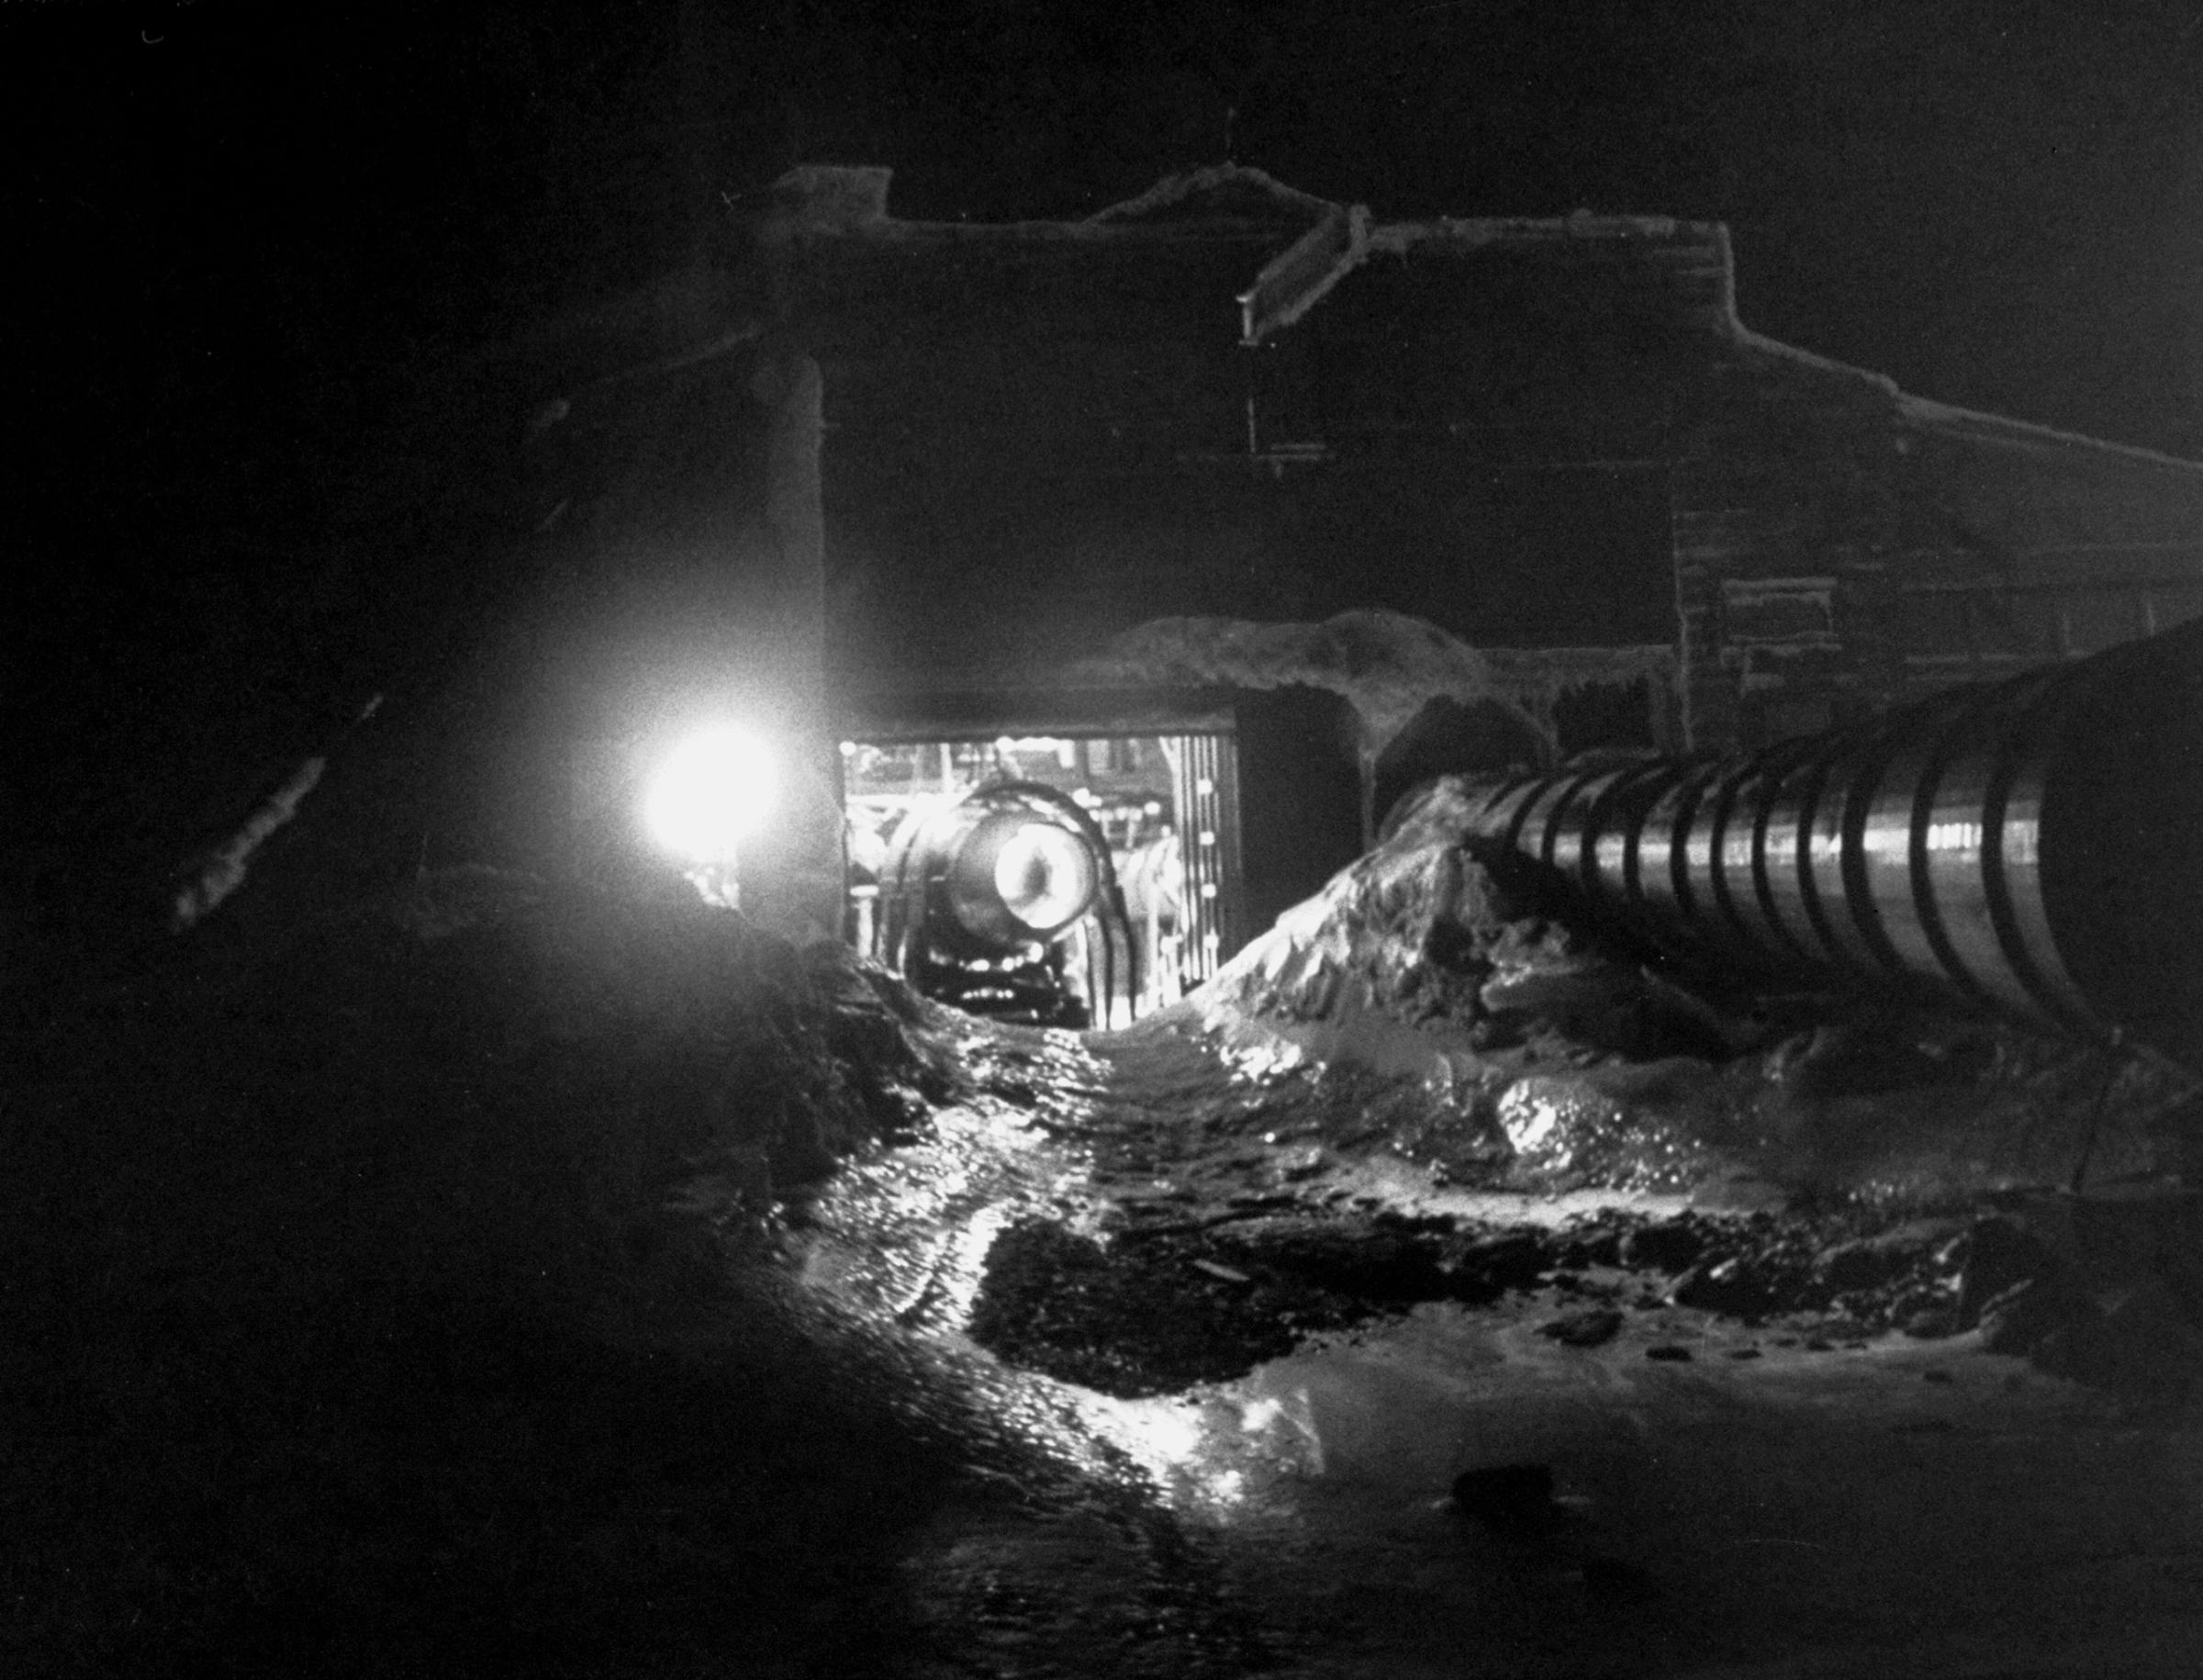 Jet test, carried on in an open-front steel hangar, is run day and night to measure and photograph ice which forms at the intake on the inside of mounted engine. Depression in snowbank is created by the engine's fiery blast. . . . When engine is turned off, water quickly refreezes rock-hard.